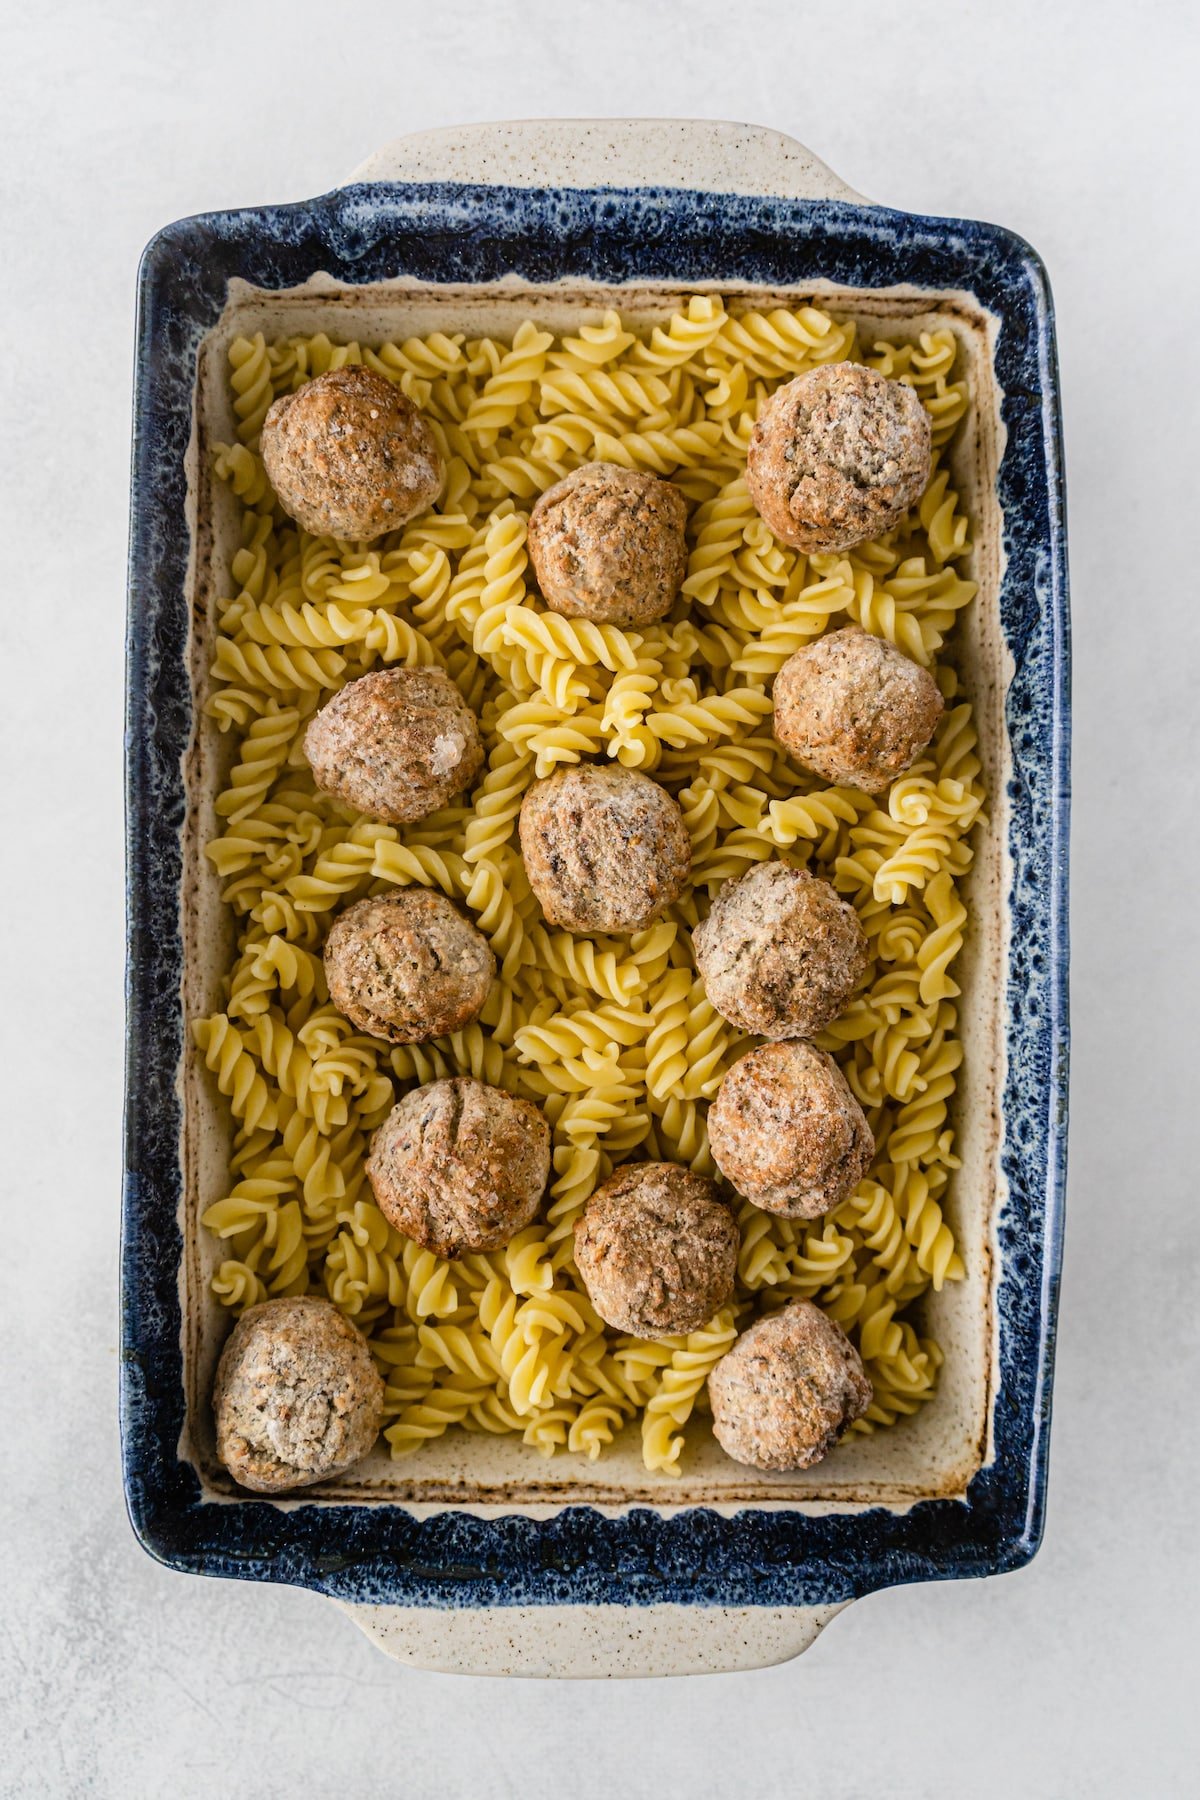 meatballs and cooked pasta in casserole dish.